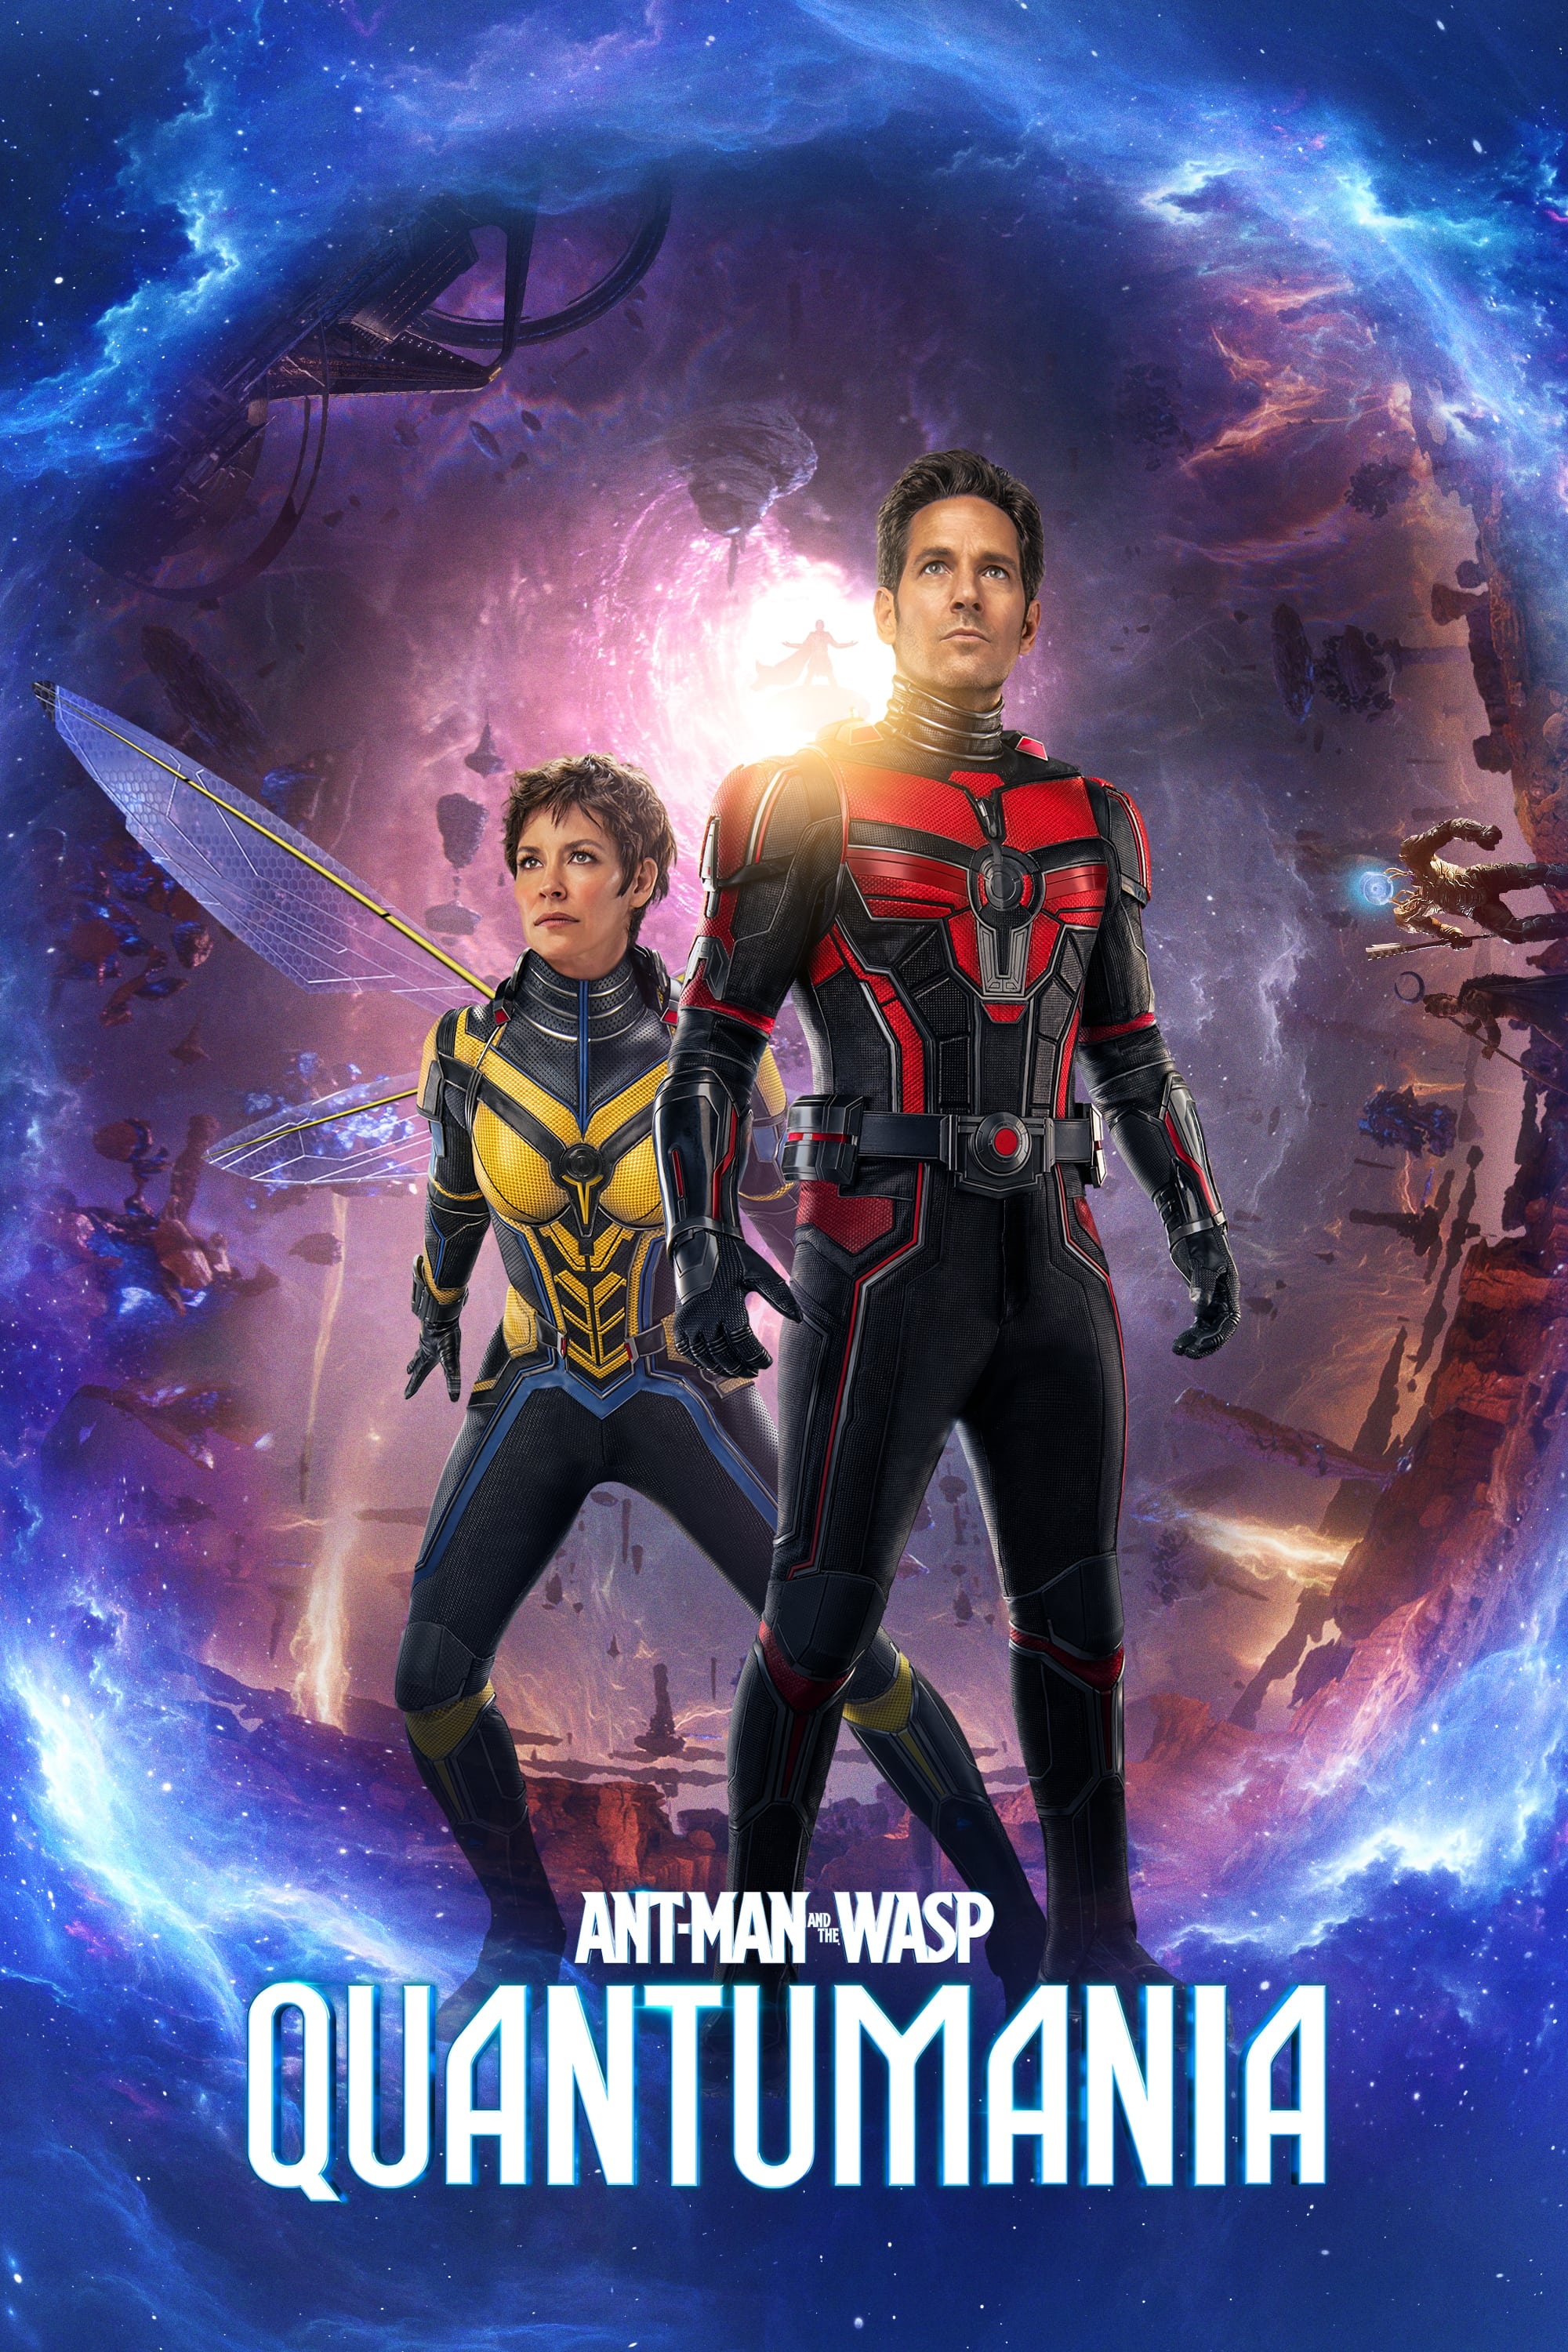 Ant-Man and the Wasp: Quantumania Box Office Hit